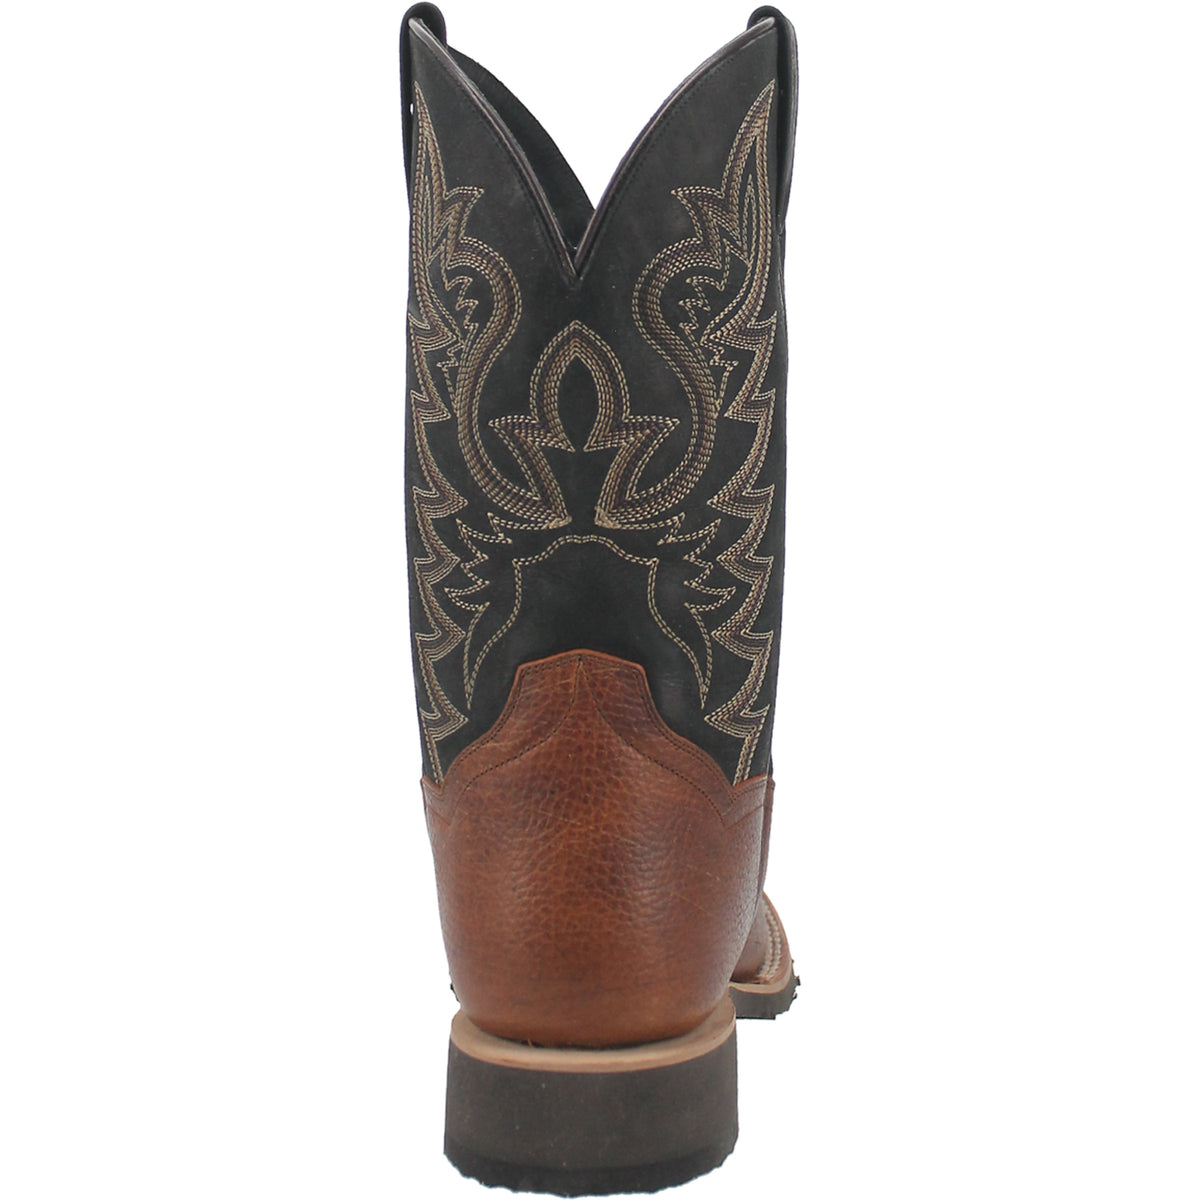 BOLDON LEATHER BOOT Cover